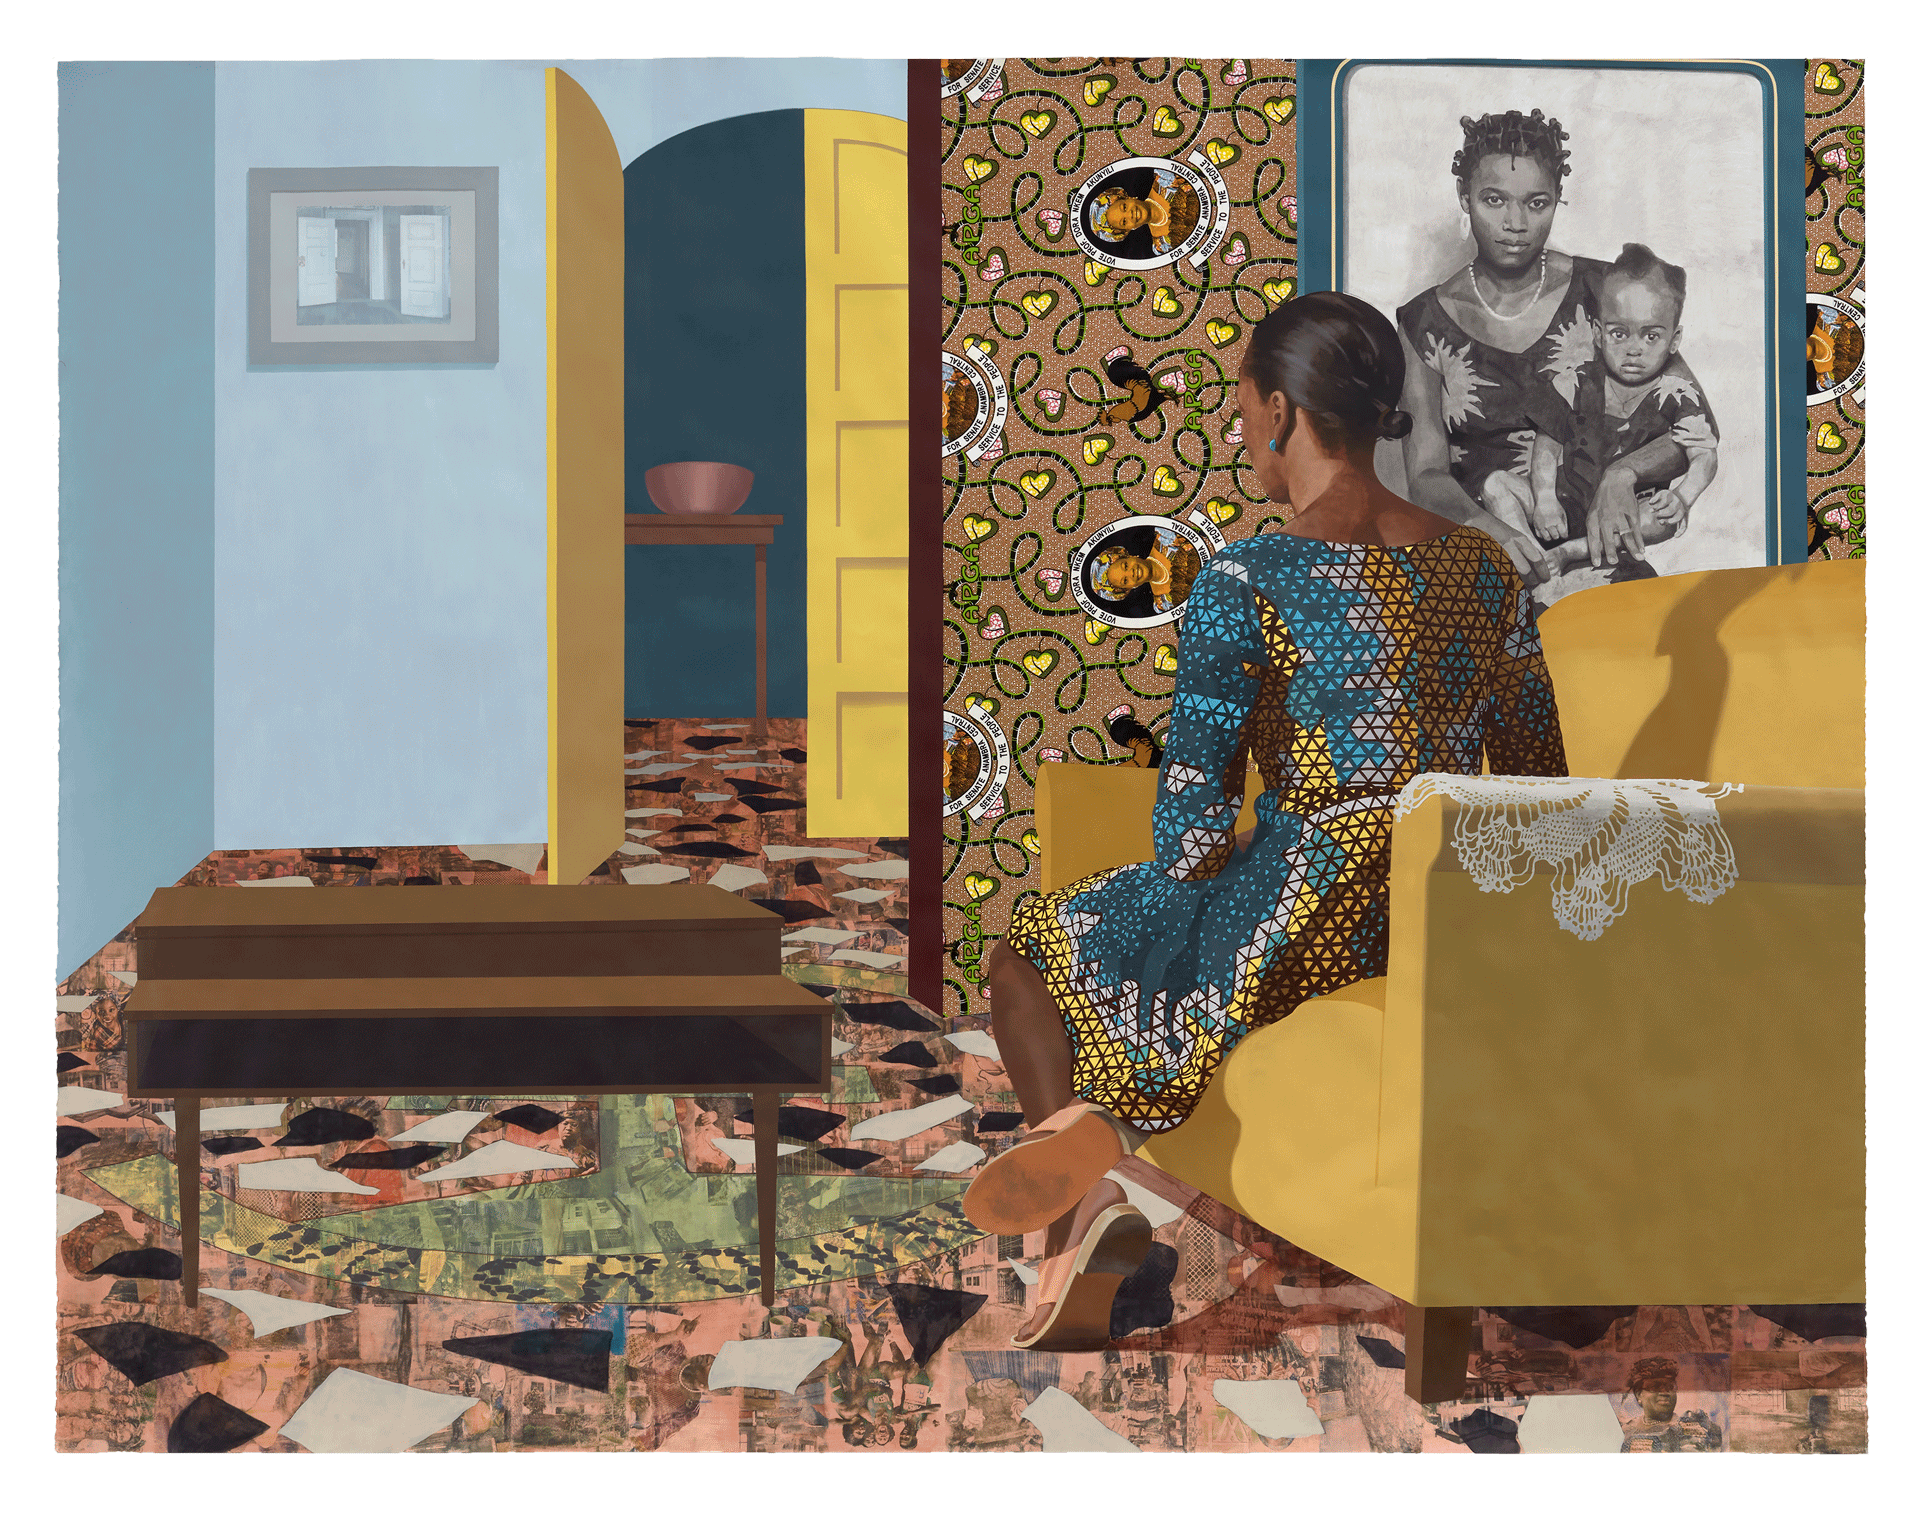 A painting by Njideka Akunyili Crosby titled Mother and Child, dated 2016.